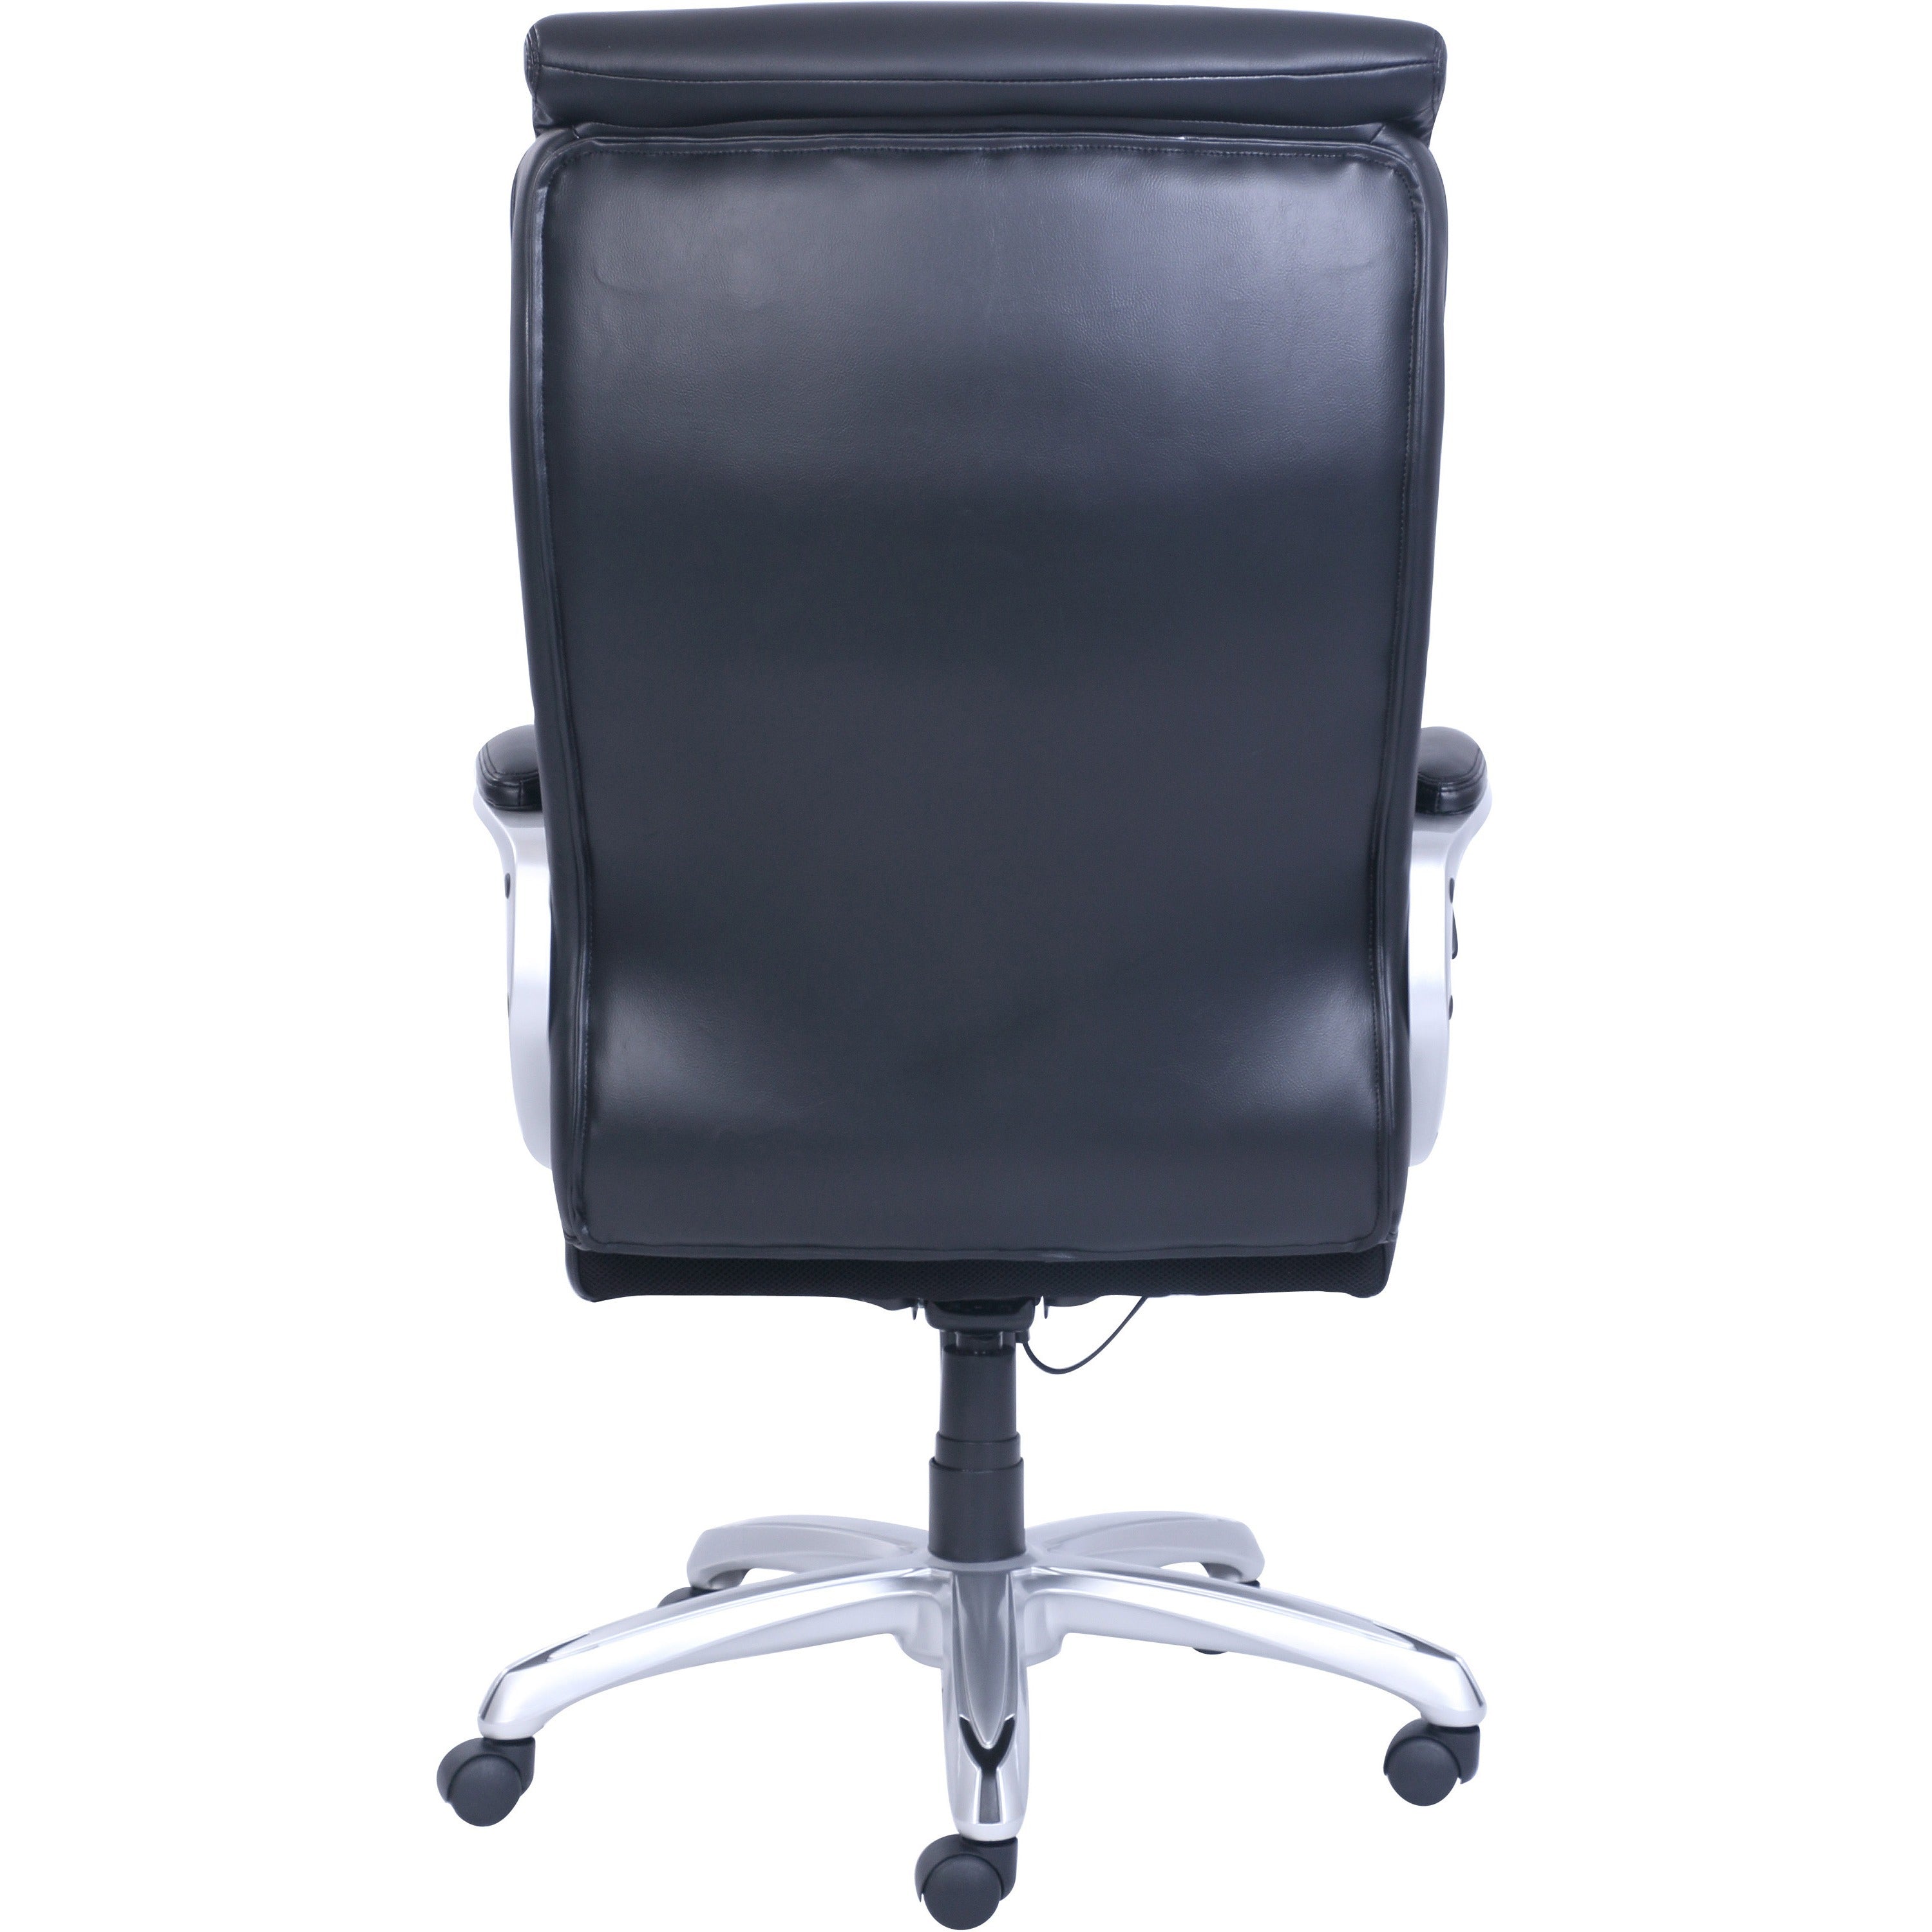 lorell-wellness-by-design-big-&-tall-chair-with-flexible-air-technology-black-bonded-leather-seat-black-bonded-leather-back-5-star-base-armrest-1-each_llr48845 - 3